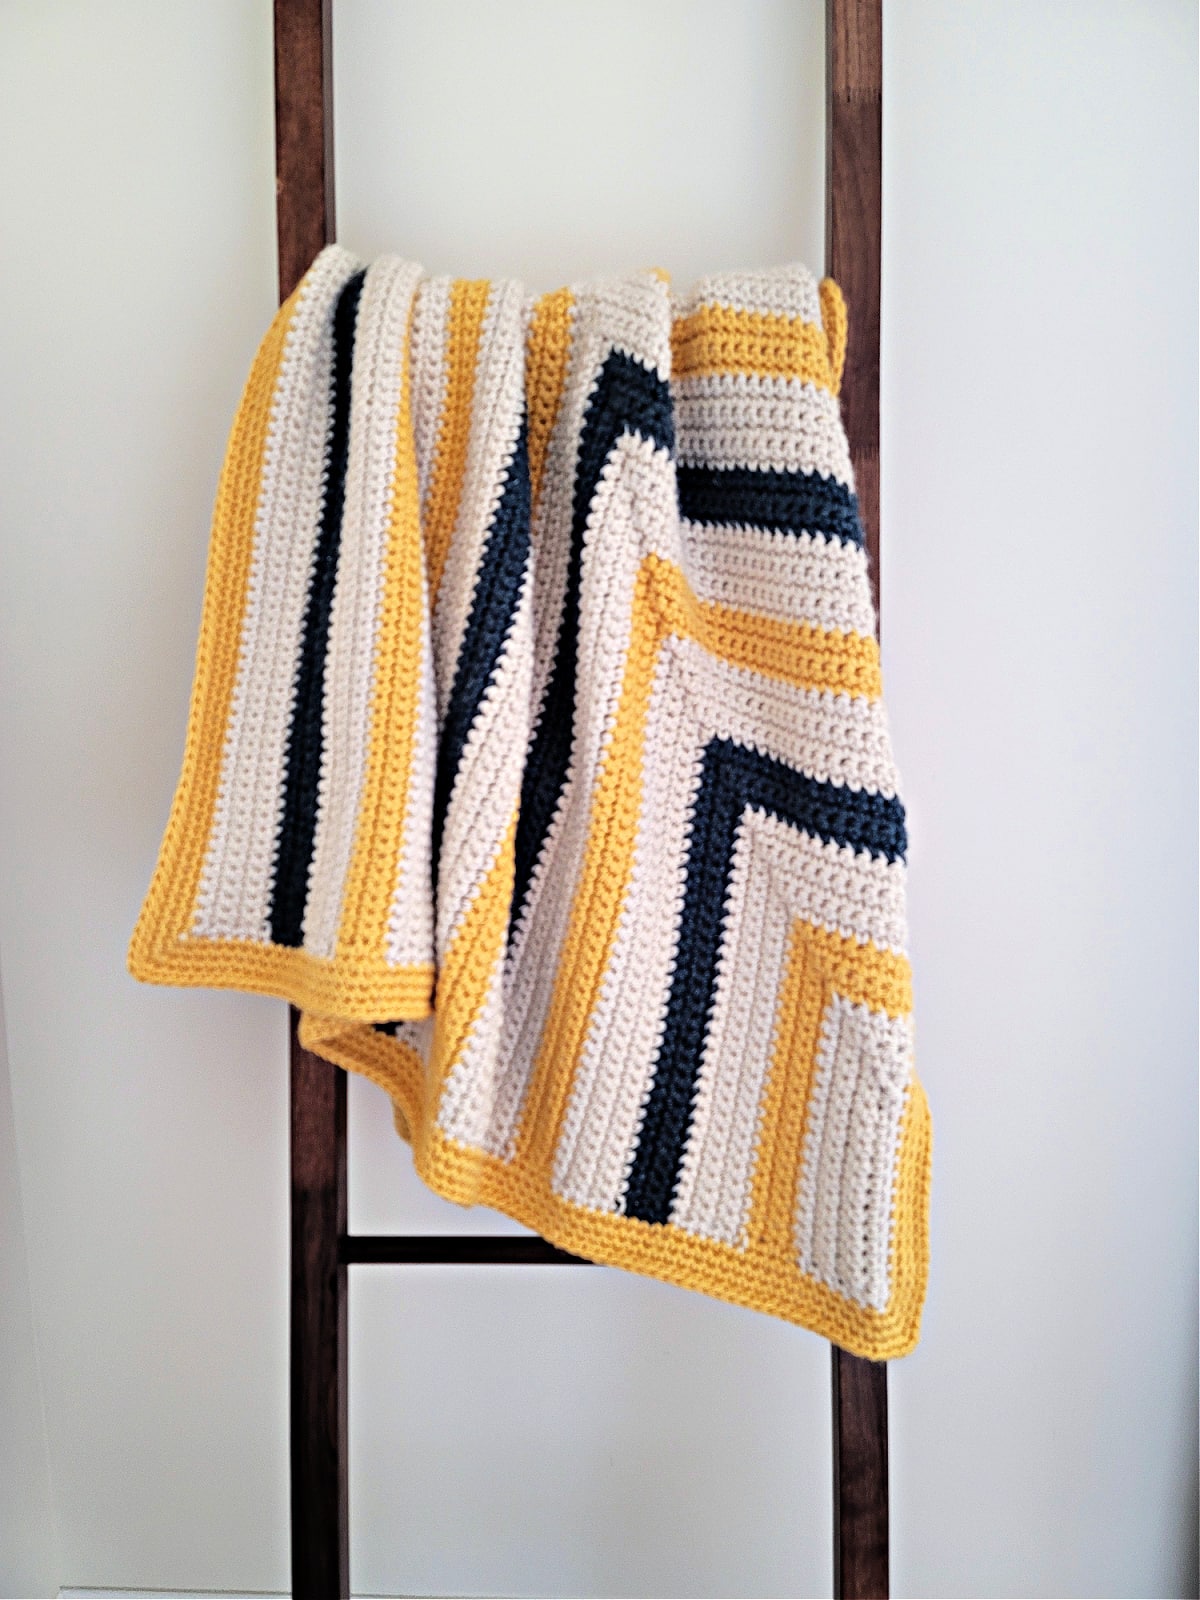 A chunky crochet blanket draped over a brown wood blanket ladder.